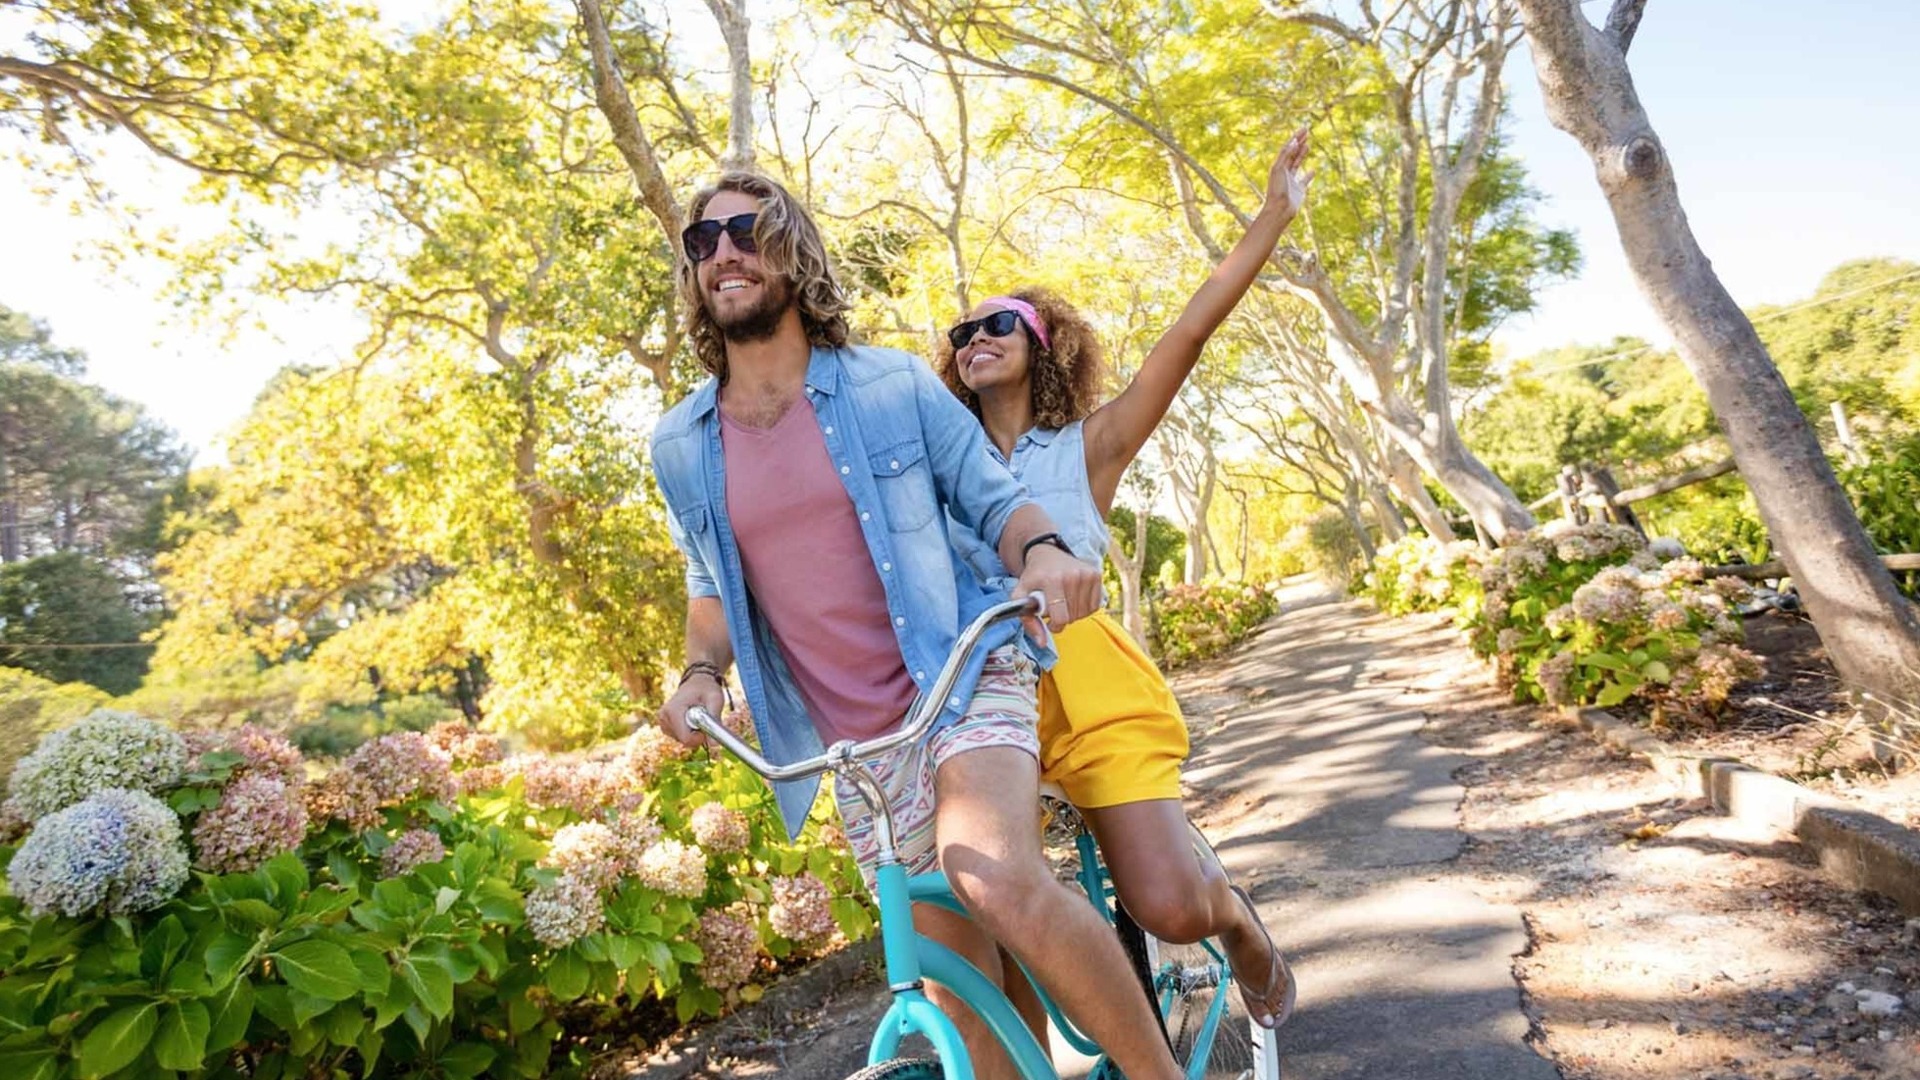 Man and woman riding a two person bicycle on a path